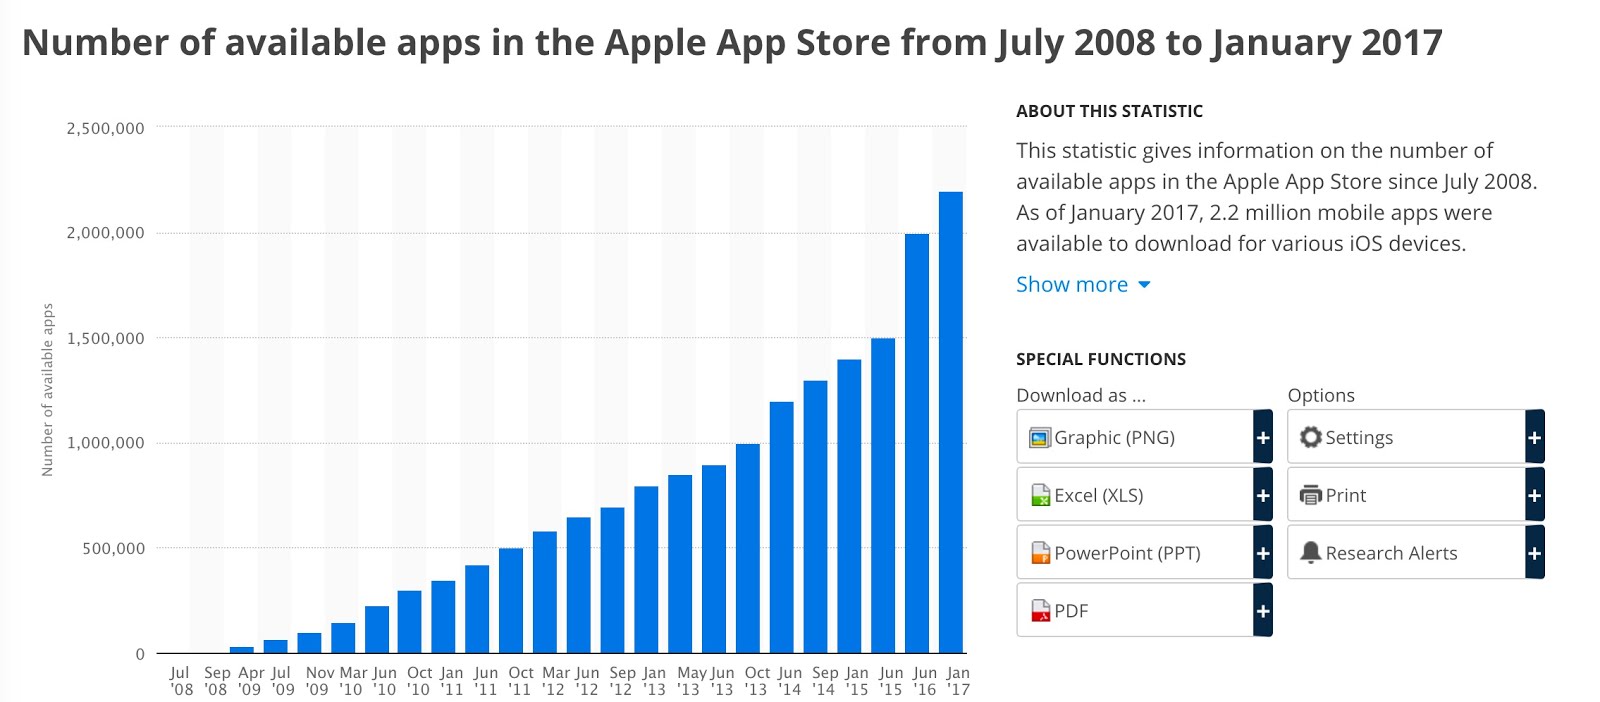 25E2258025A2 Apple App Store number of available apps 2017 Statistic